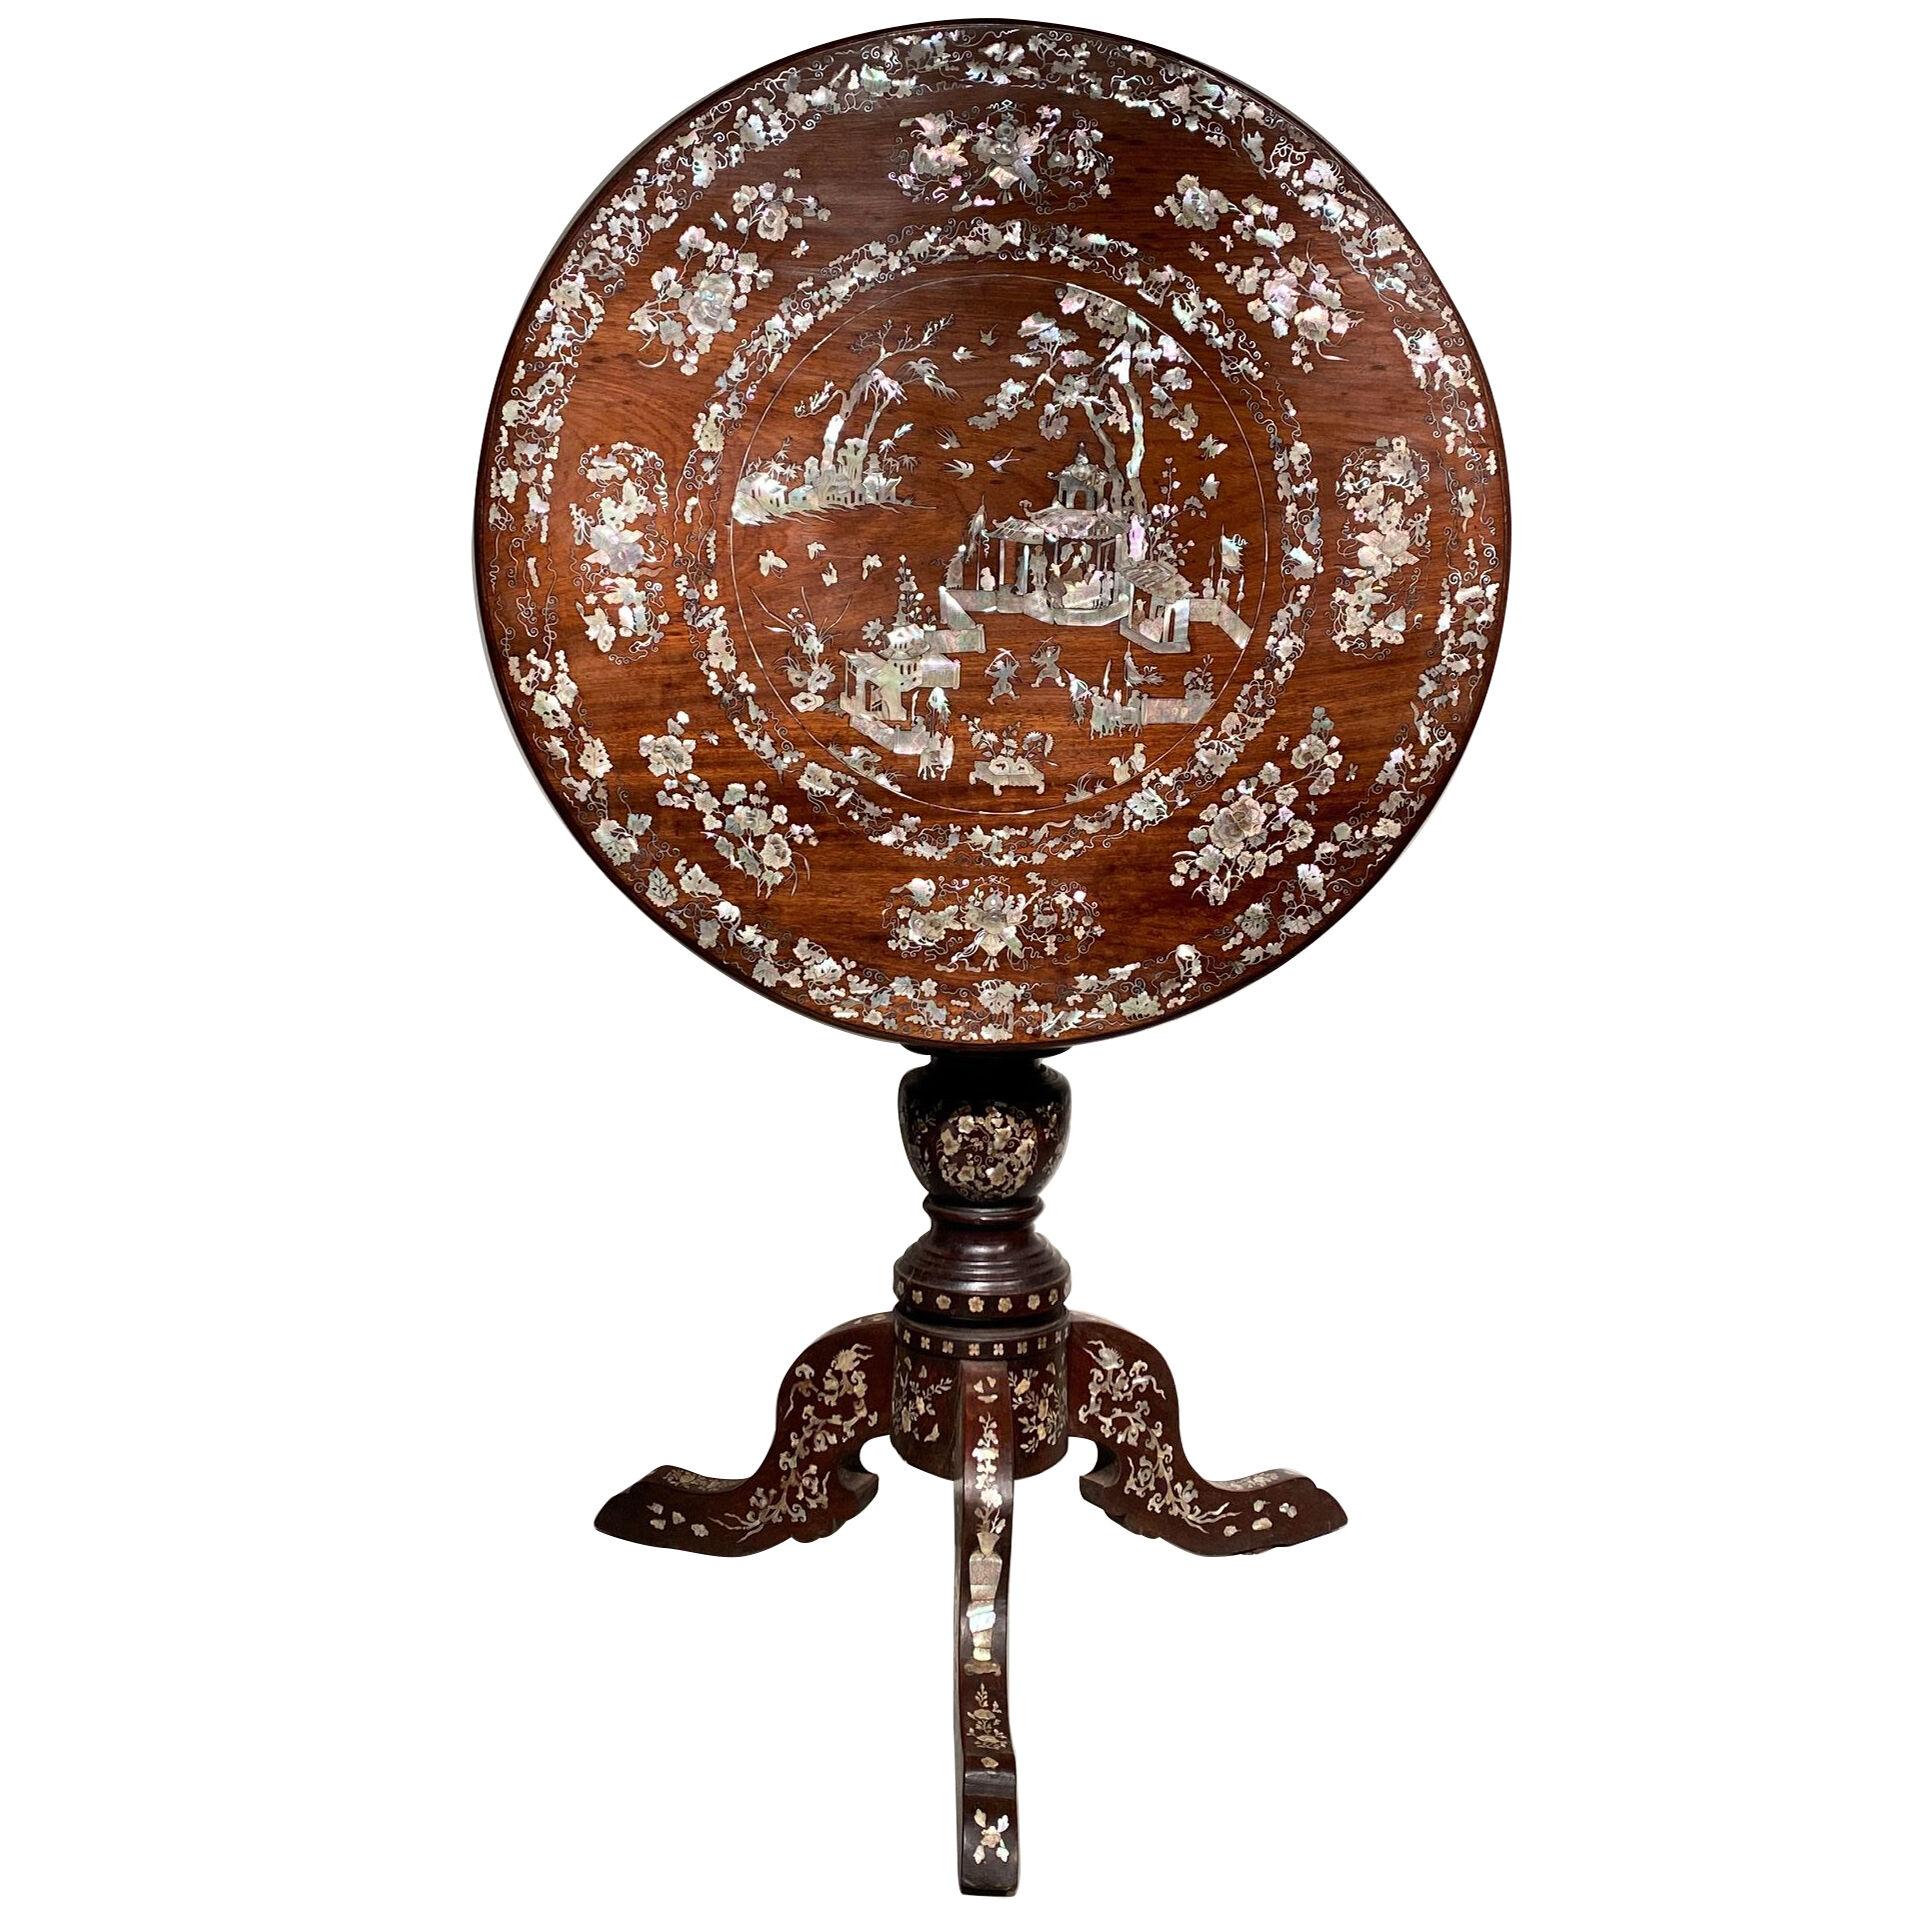 An Anglo-Chinese birdcage tripod table with mother-of-pearl inlay.